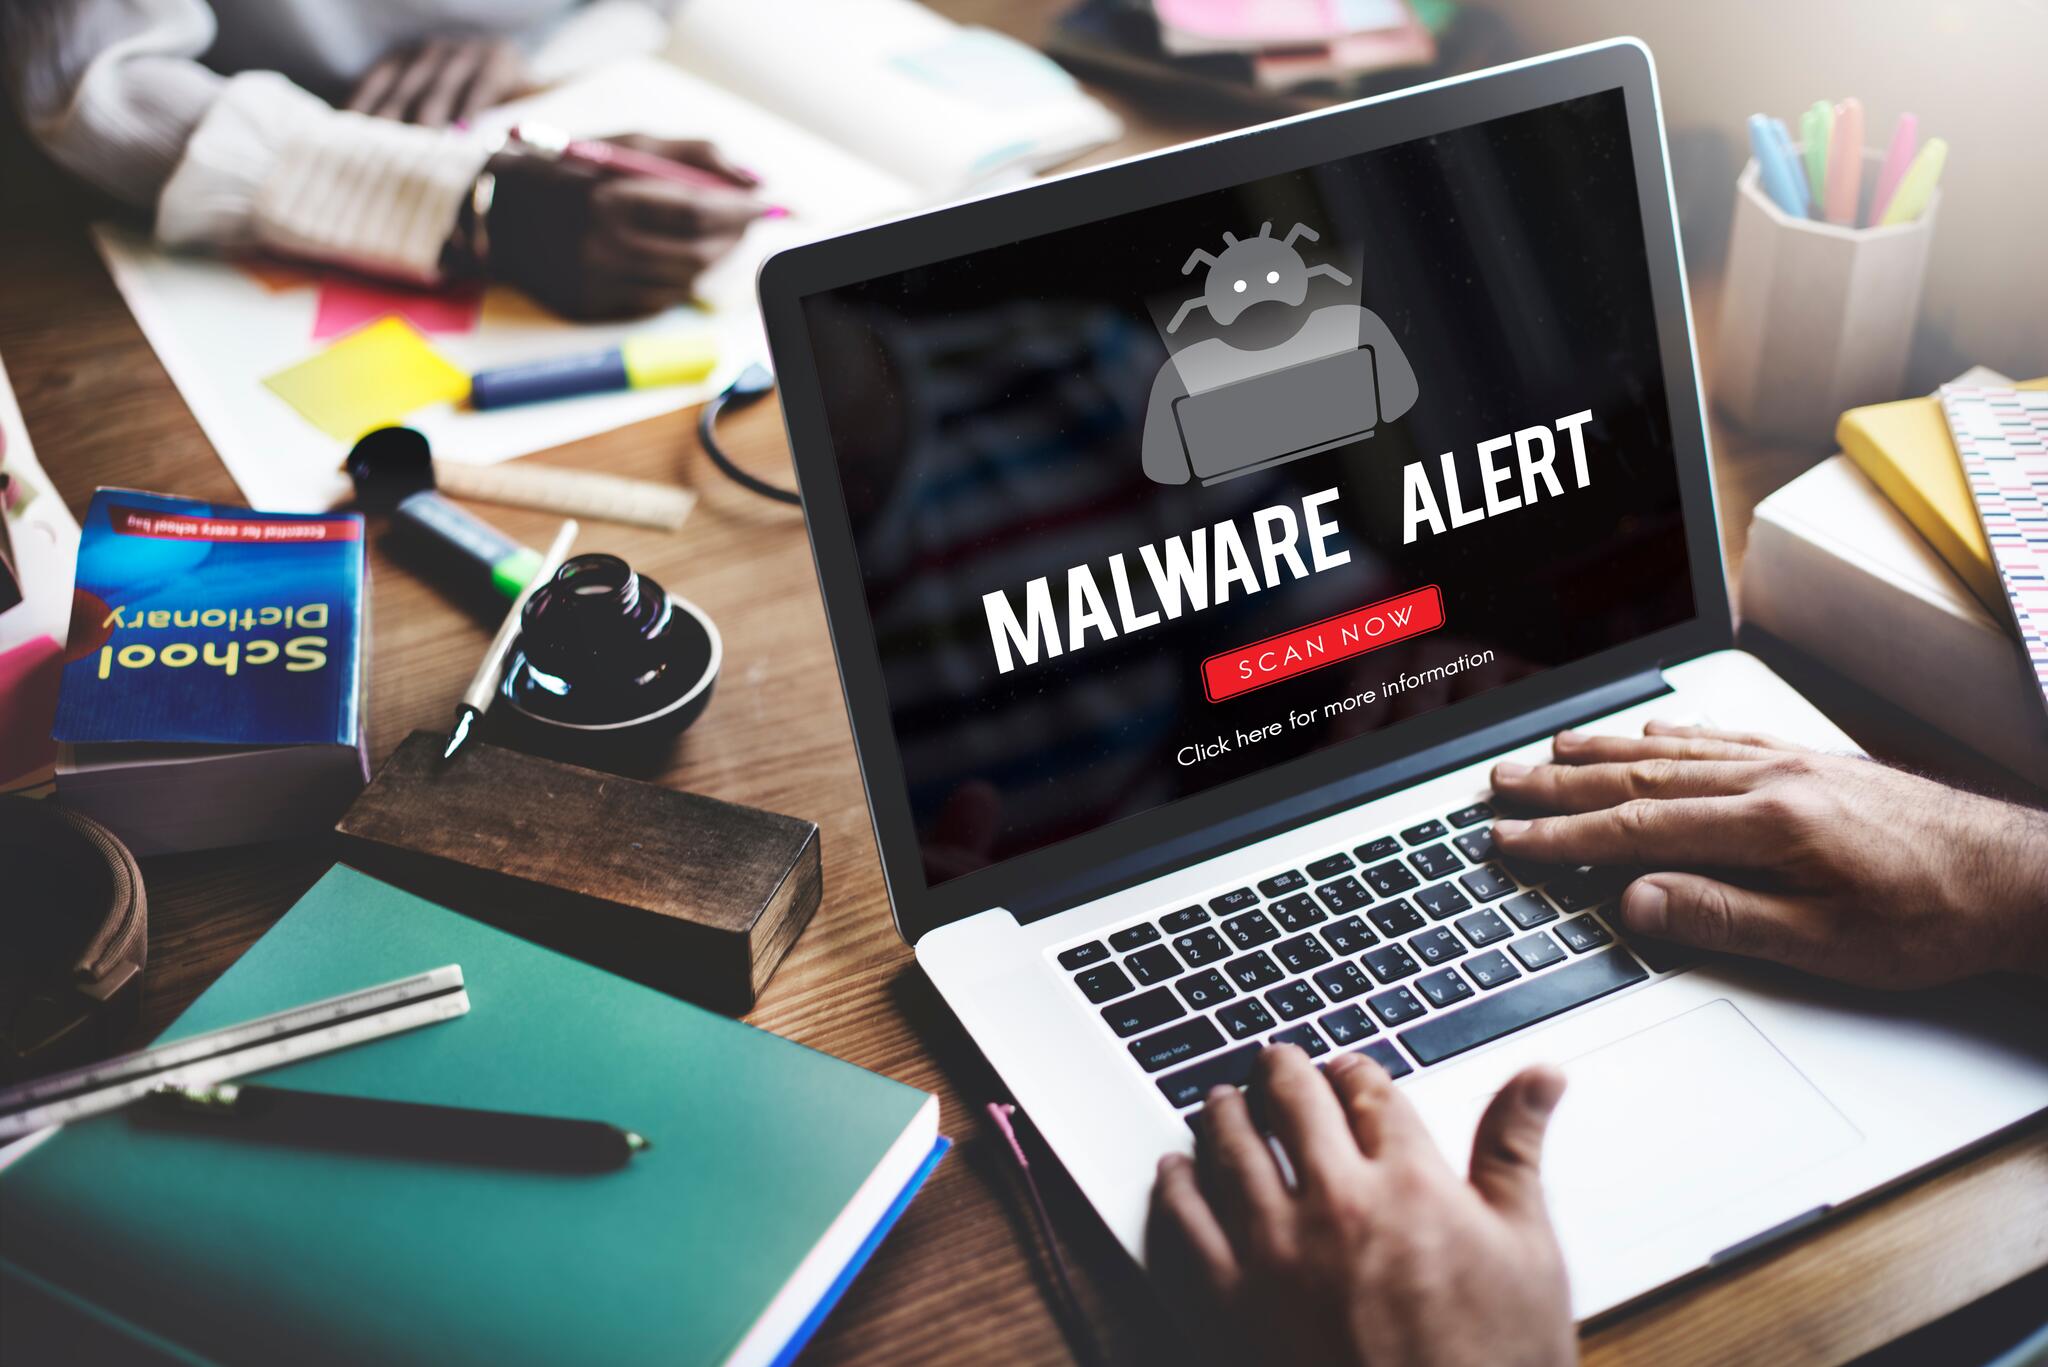 A man sits in front of a laptop. An image of a virus with the word "malware" appears on his laptop screen.